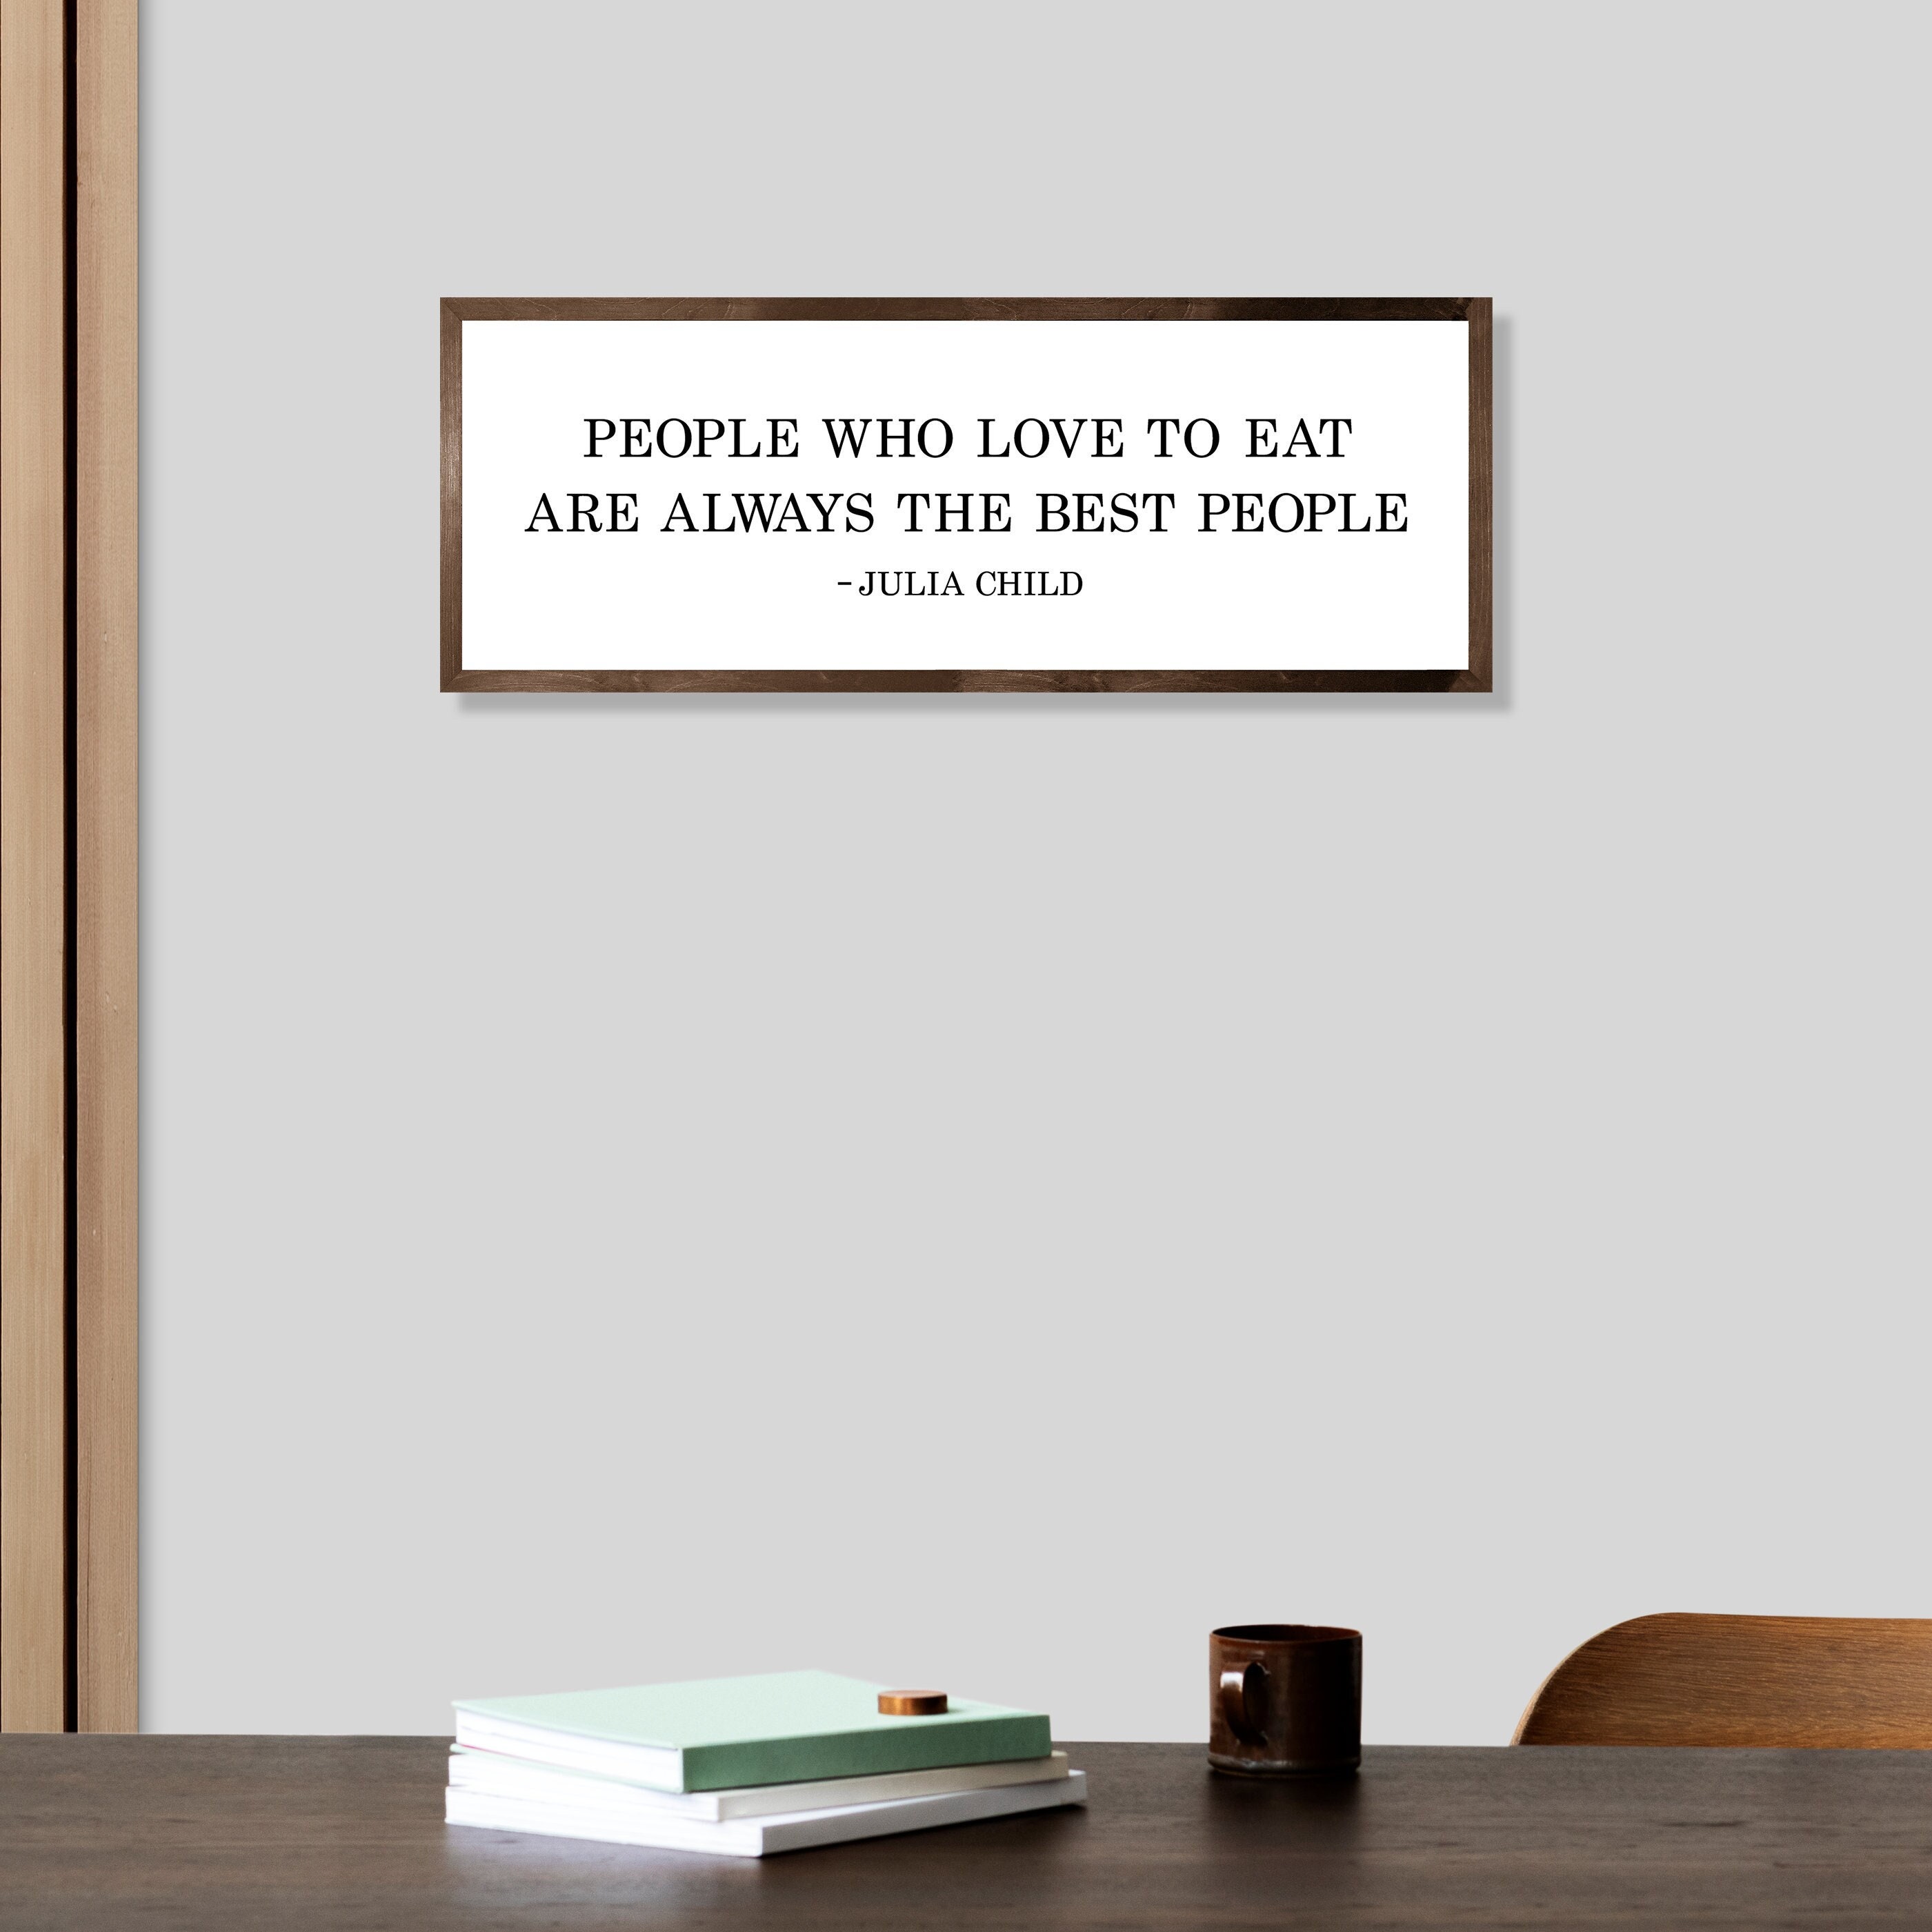 People who love to kitchen eat sign child decor-wall quote-dining sign the are people decor-kitchen for sign-julia best room always wall